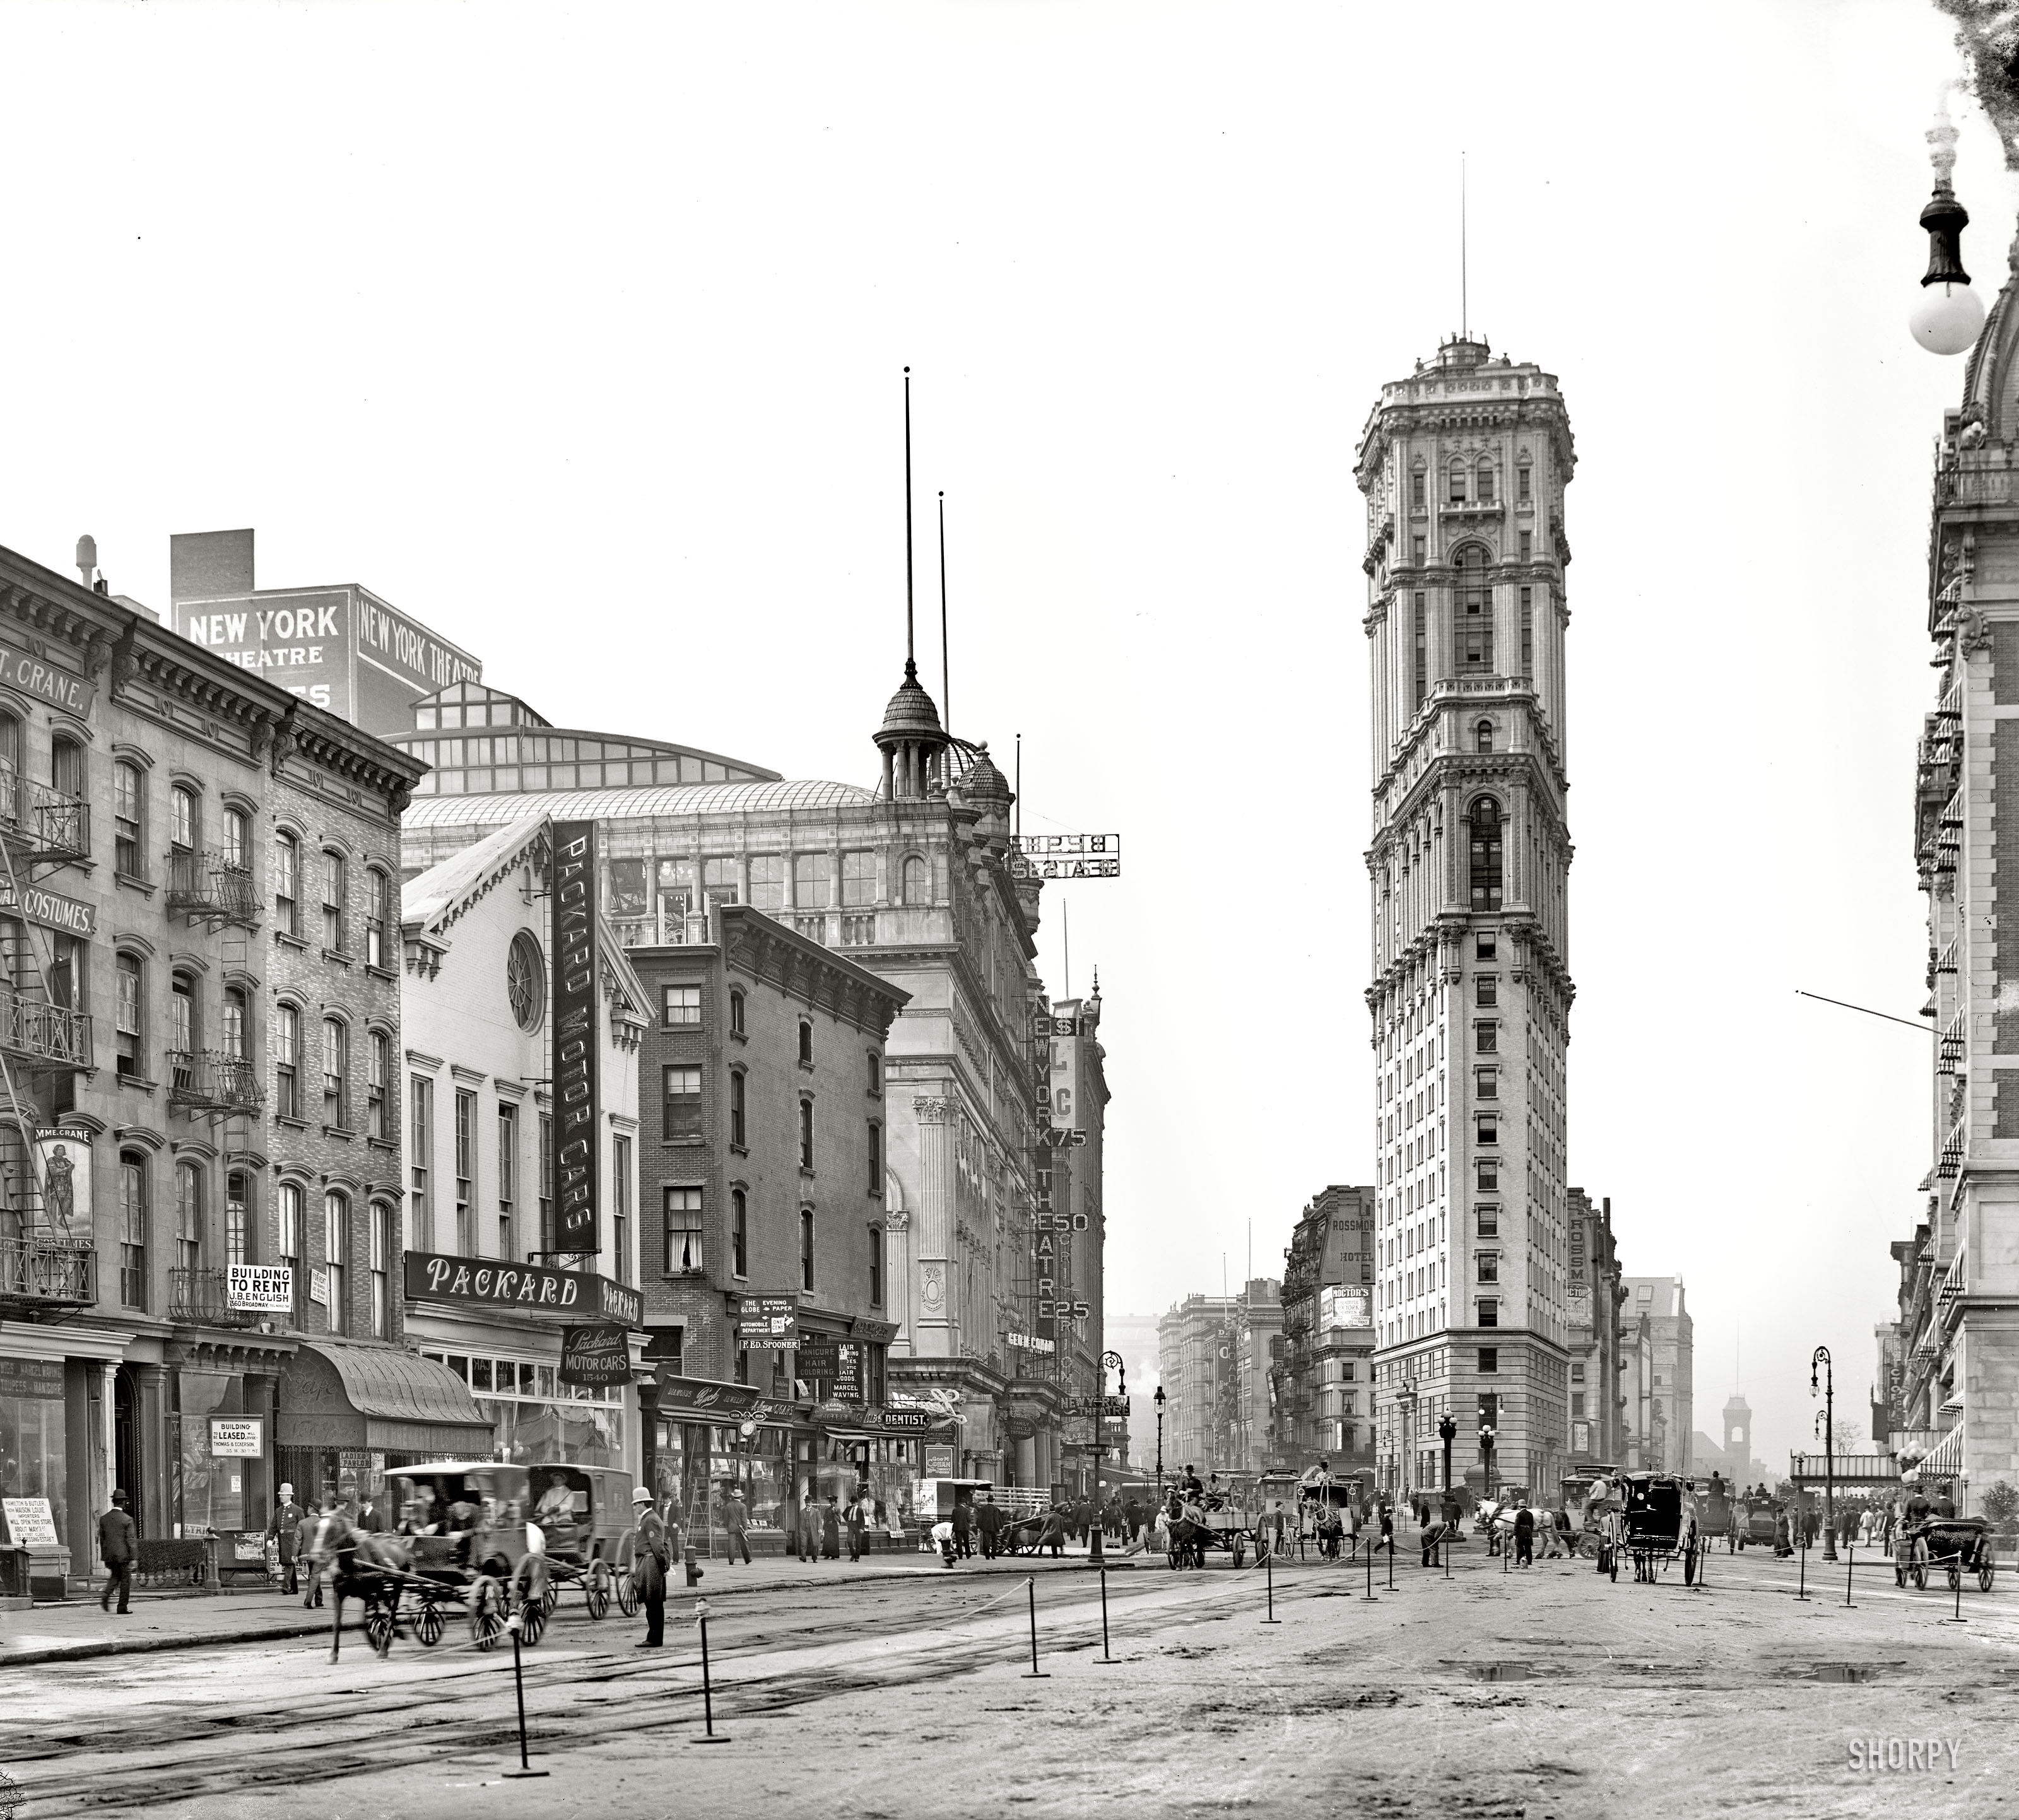 New York circa 1904. "Longacre Square." Soon to be renamed Times Square after the recently completed New York Times tower seen here. 8x10 inch dry plate glass negative, Detroit Publishing Company. View full size.